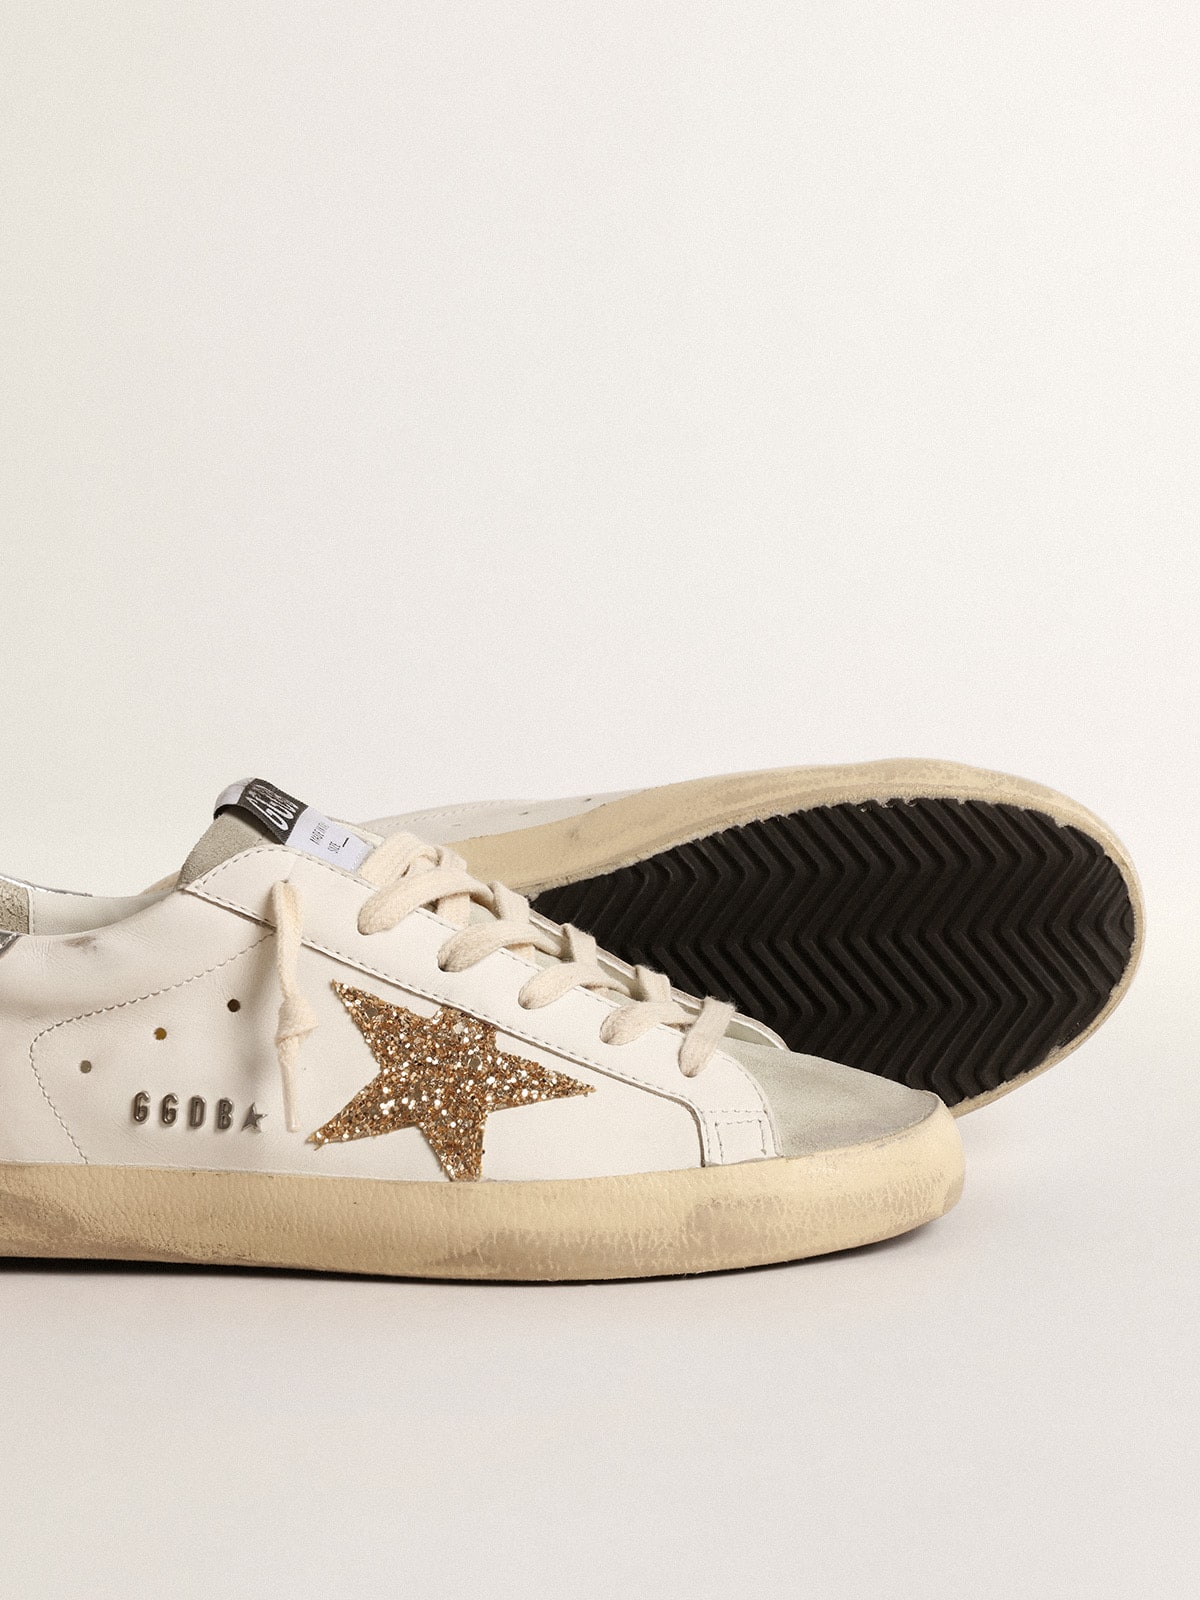 Women's Super-Star with gold glitter star and ice-gray suede inserts